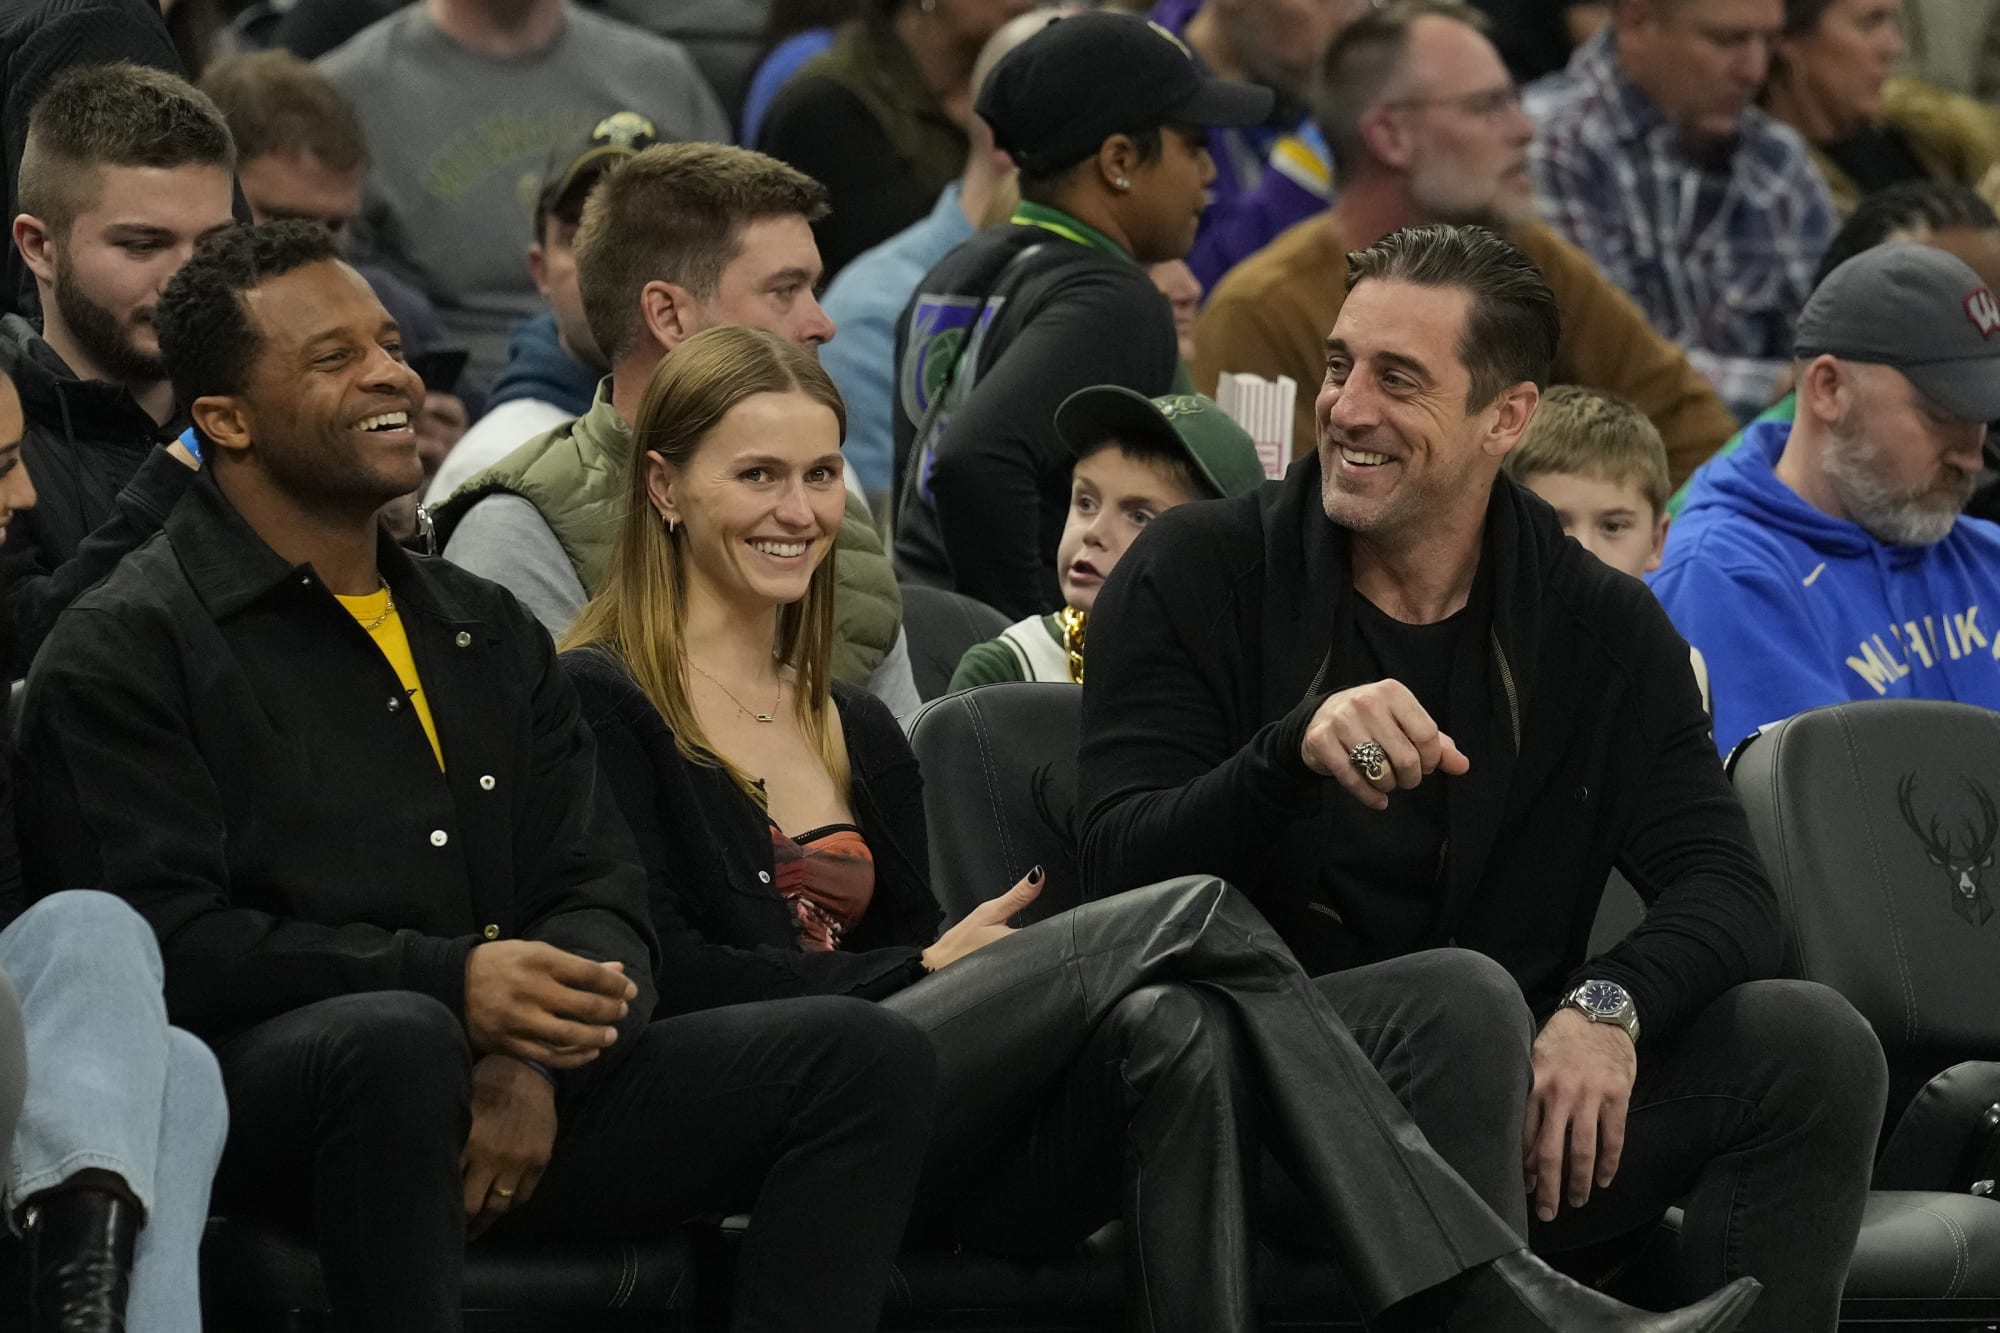 Aaron Rodgers rumored new girlfriend has an NBA connection